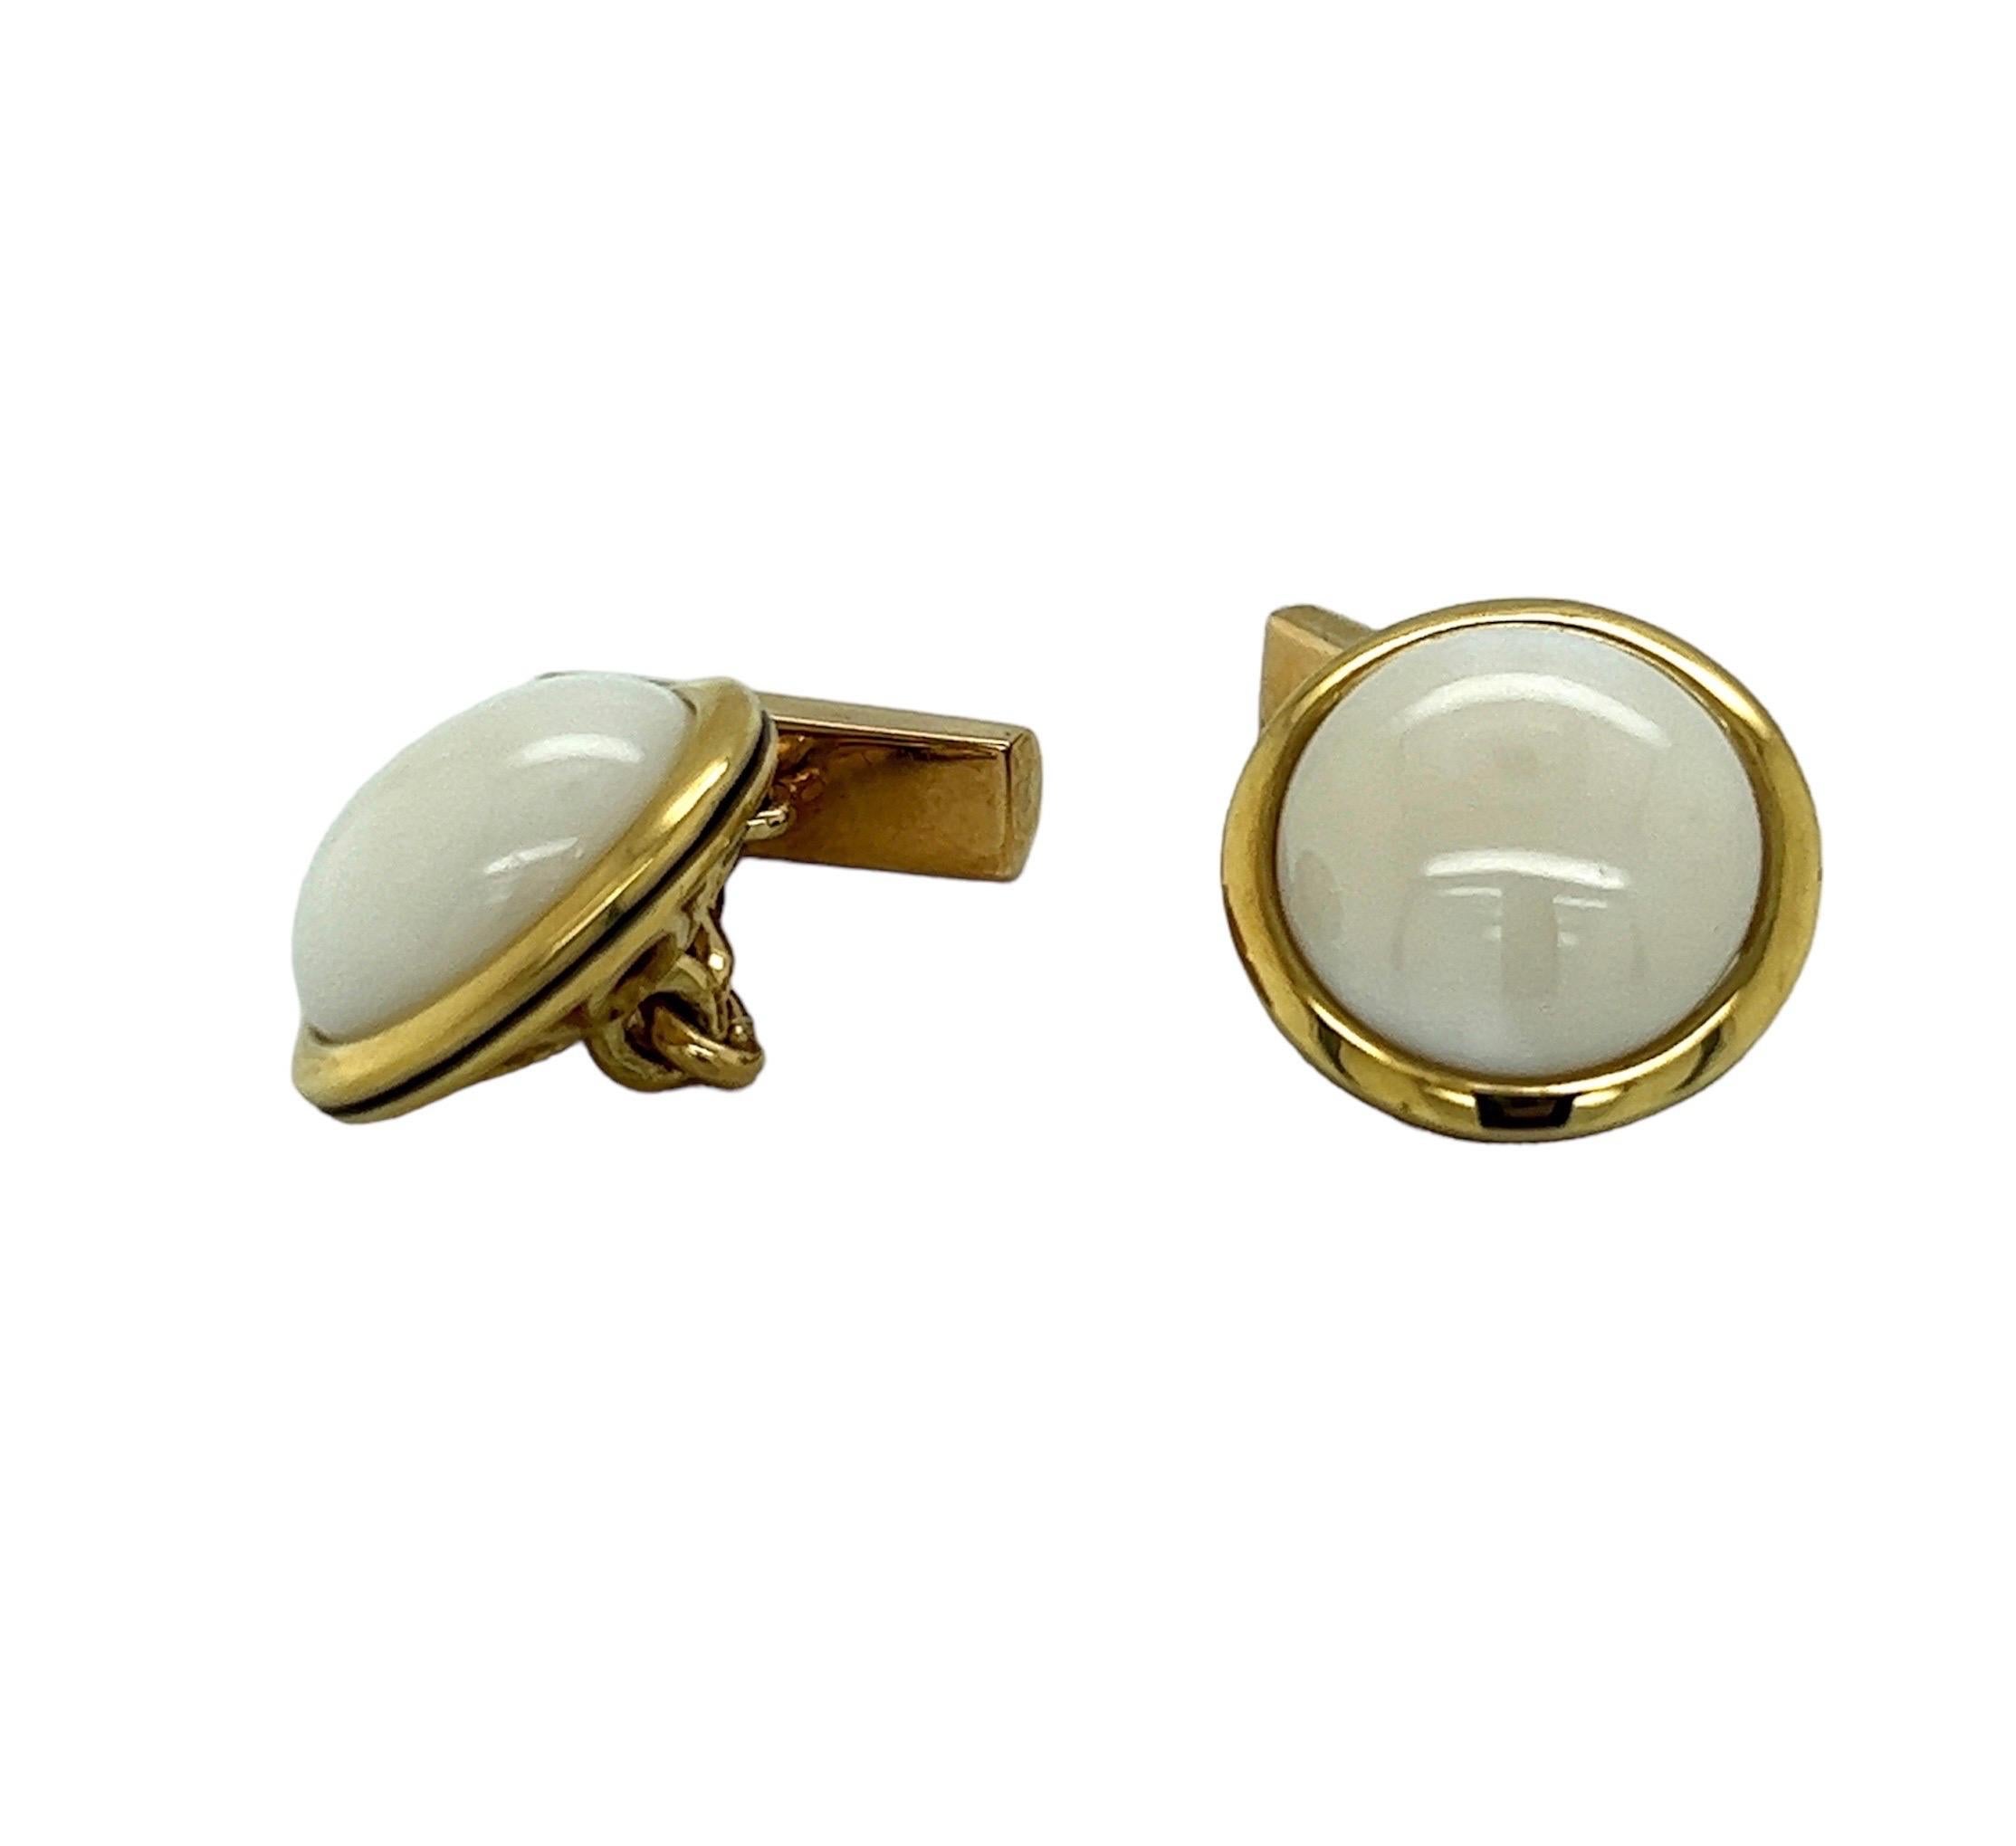 Exquisite 18k Yellow Gold Cufflinks with White Coral and Black Enamel In New Condition For Sale In New York, NY